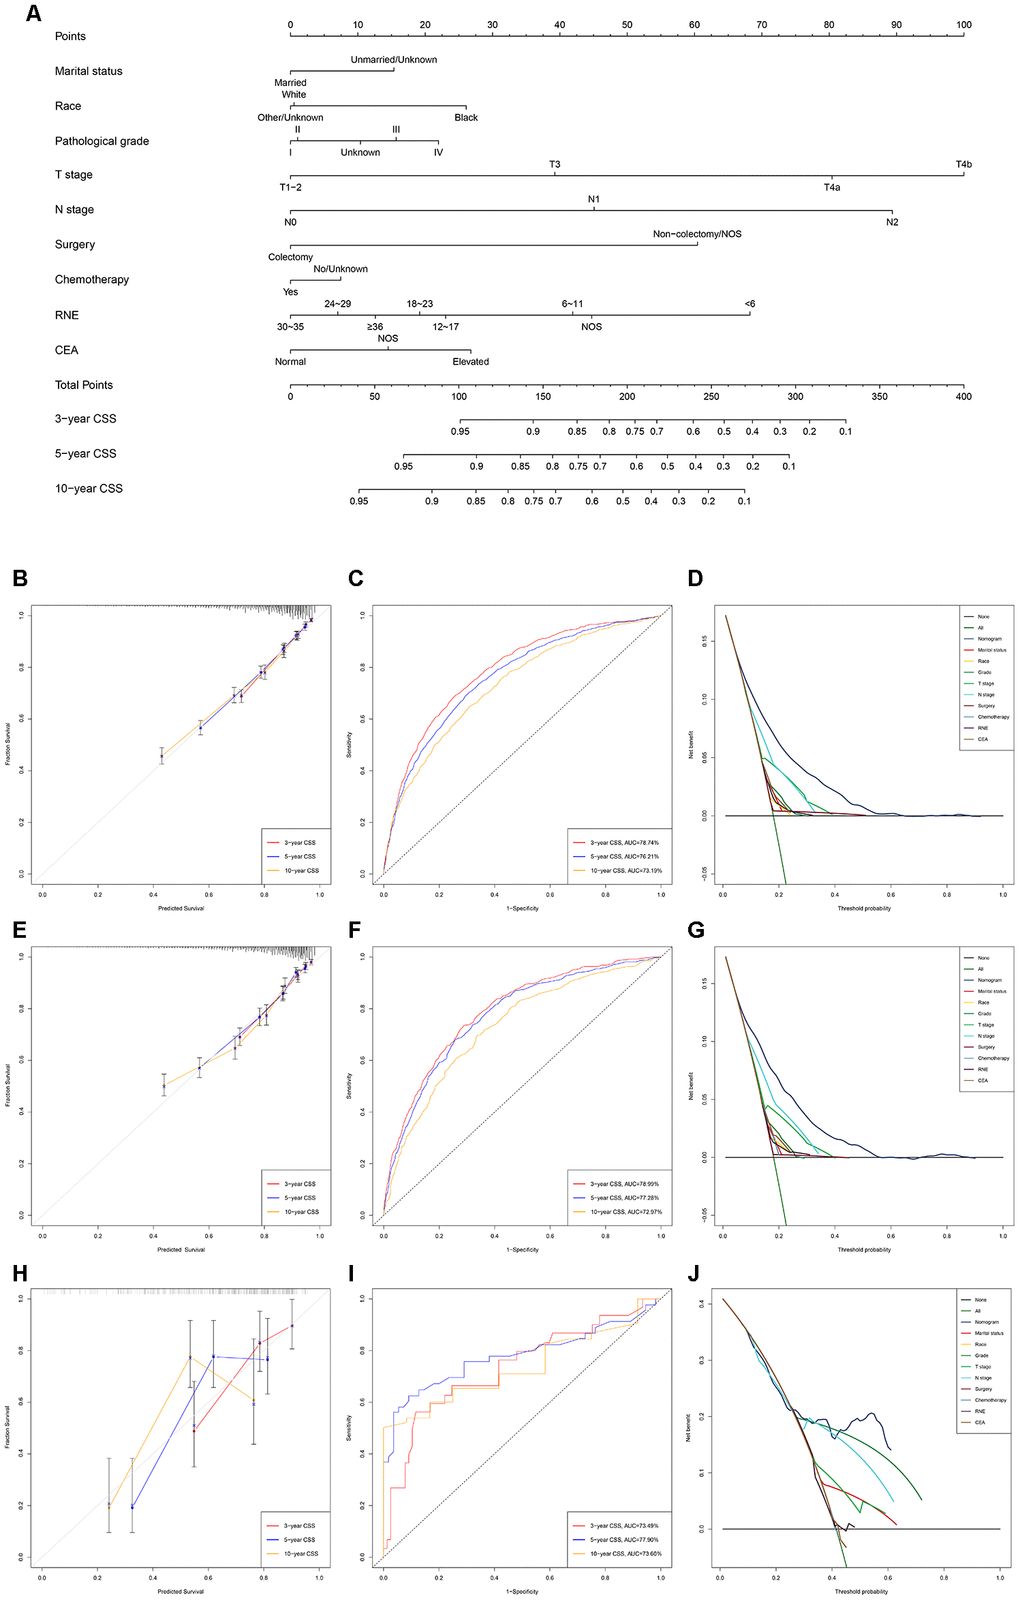 Development and verification of the nomogram predicting CSS. (A) The nomogram of predicting CSS for patients with EOLACC. (B) The calibration curves predicting CSS in the training group. (C) The time-dependent ROC curves of nomogram predicting CSS in the training group. (D) The decision curve analysis of the nomogram and all prognostic factors for CSS in the training cohort. (E) The calibration curves predicting CSS in the verification group. (F) The time-dependent ROC curves of nomogram predicting CSS in the verification group. (G) The decision curve analysis of the nomogram and all prognostic factors for CSS in the verification. (H) The calibration curves predicting CSS in the external verification group. (I) The time-dependent ROC curves of nomogram predicting CSS in the external verification group. (J) The decision curve analysis of the nomogram and all prognostic factors for CSS in the external verification.